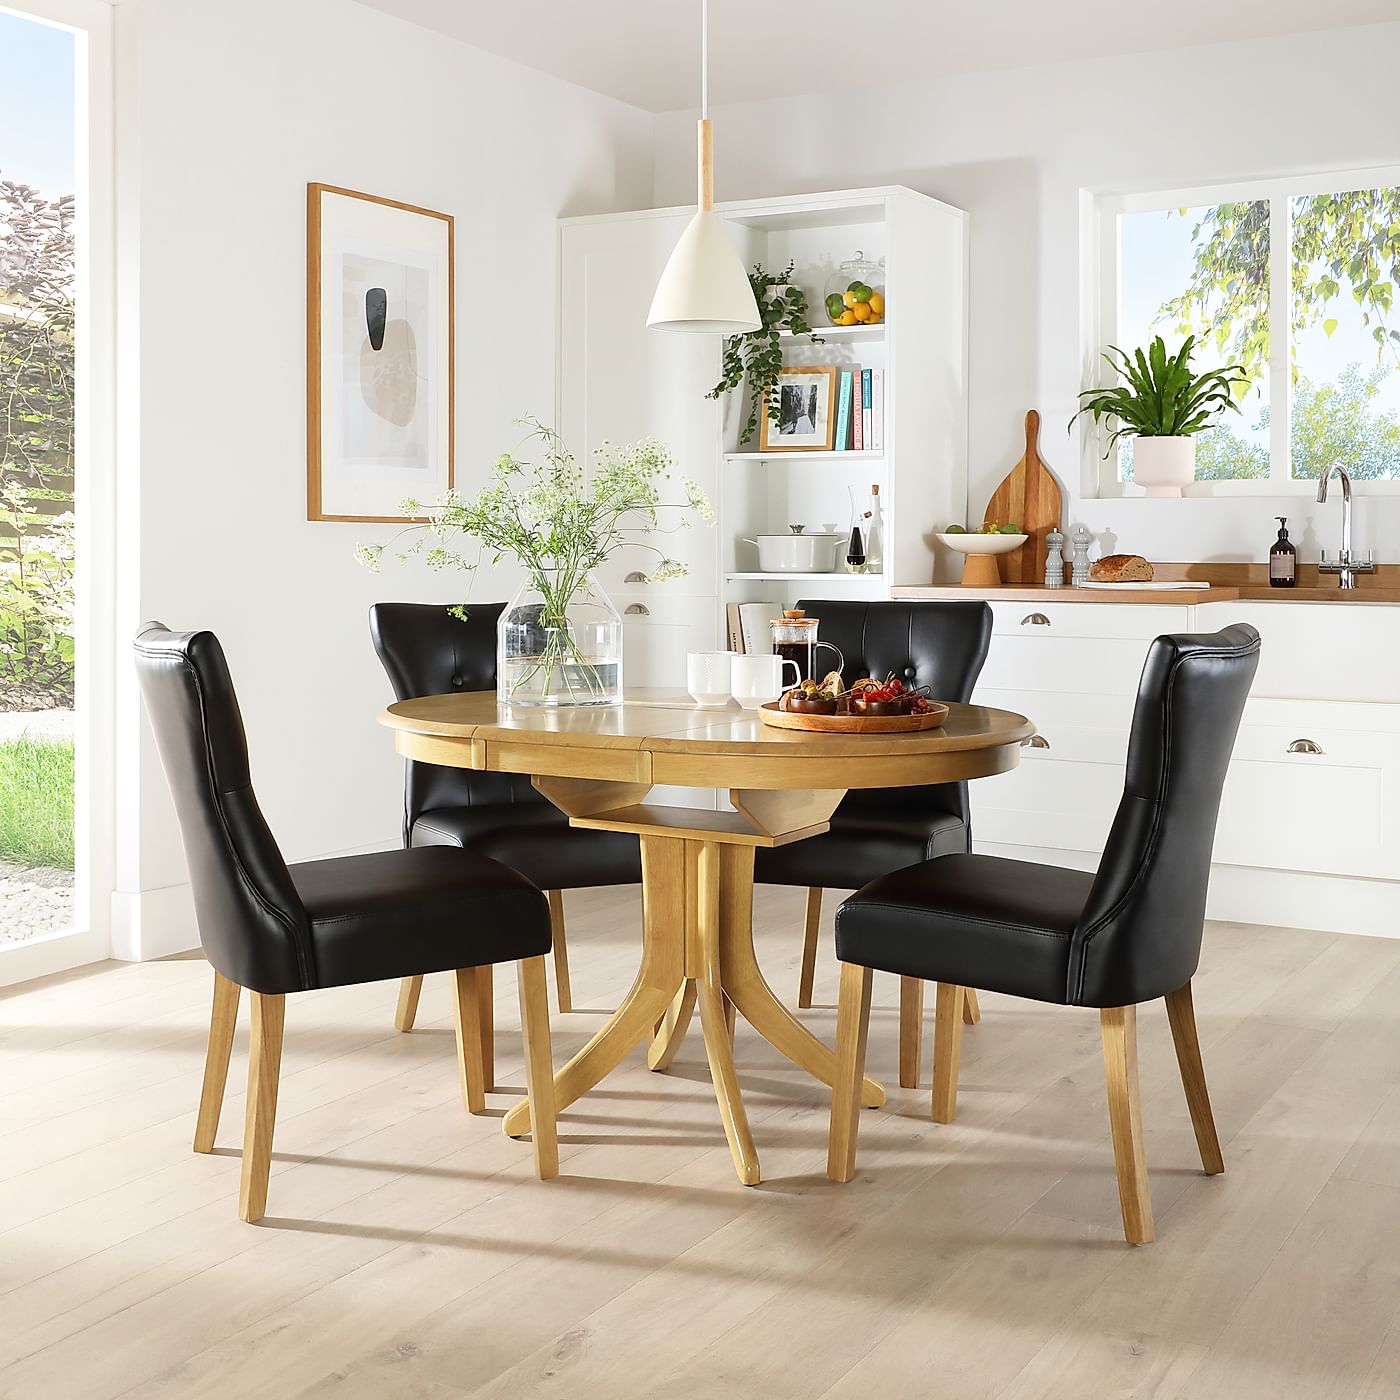 Hudson Round Oak Extending Dining Table with 6 Bewley Black Leather